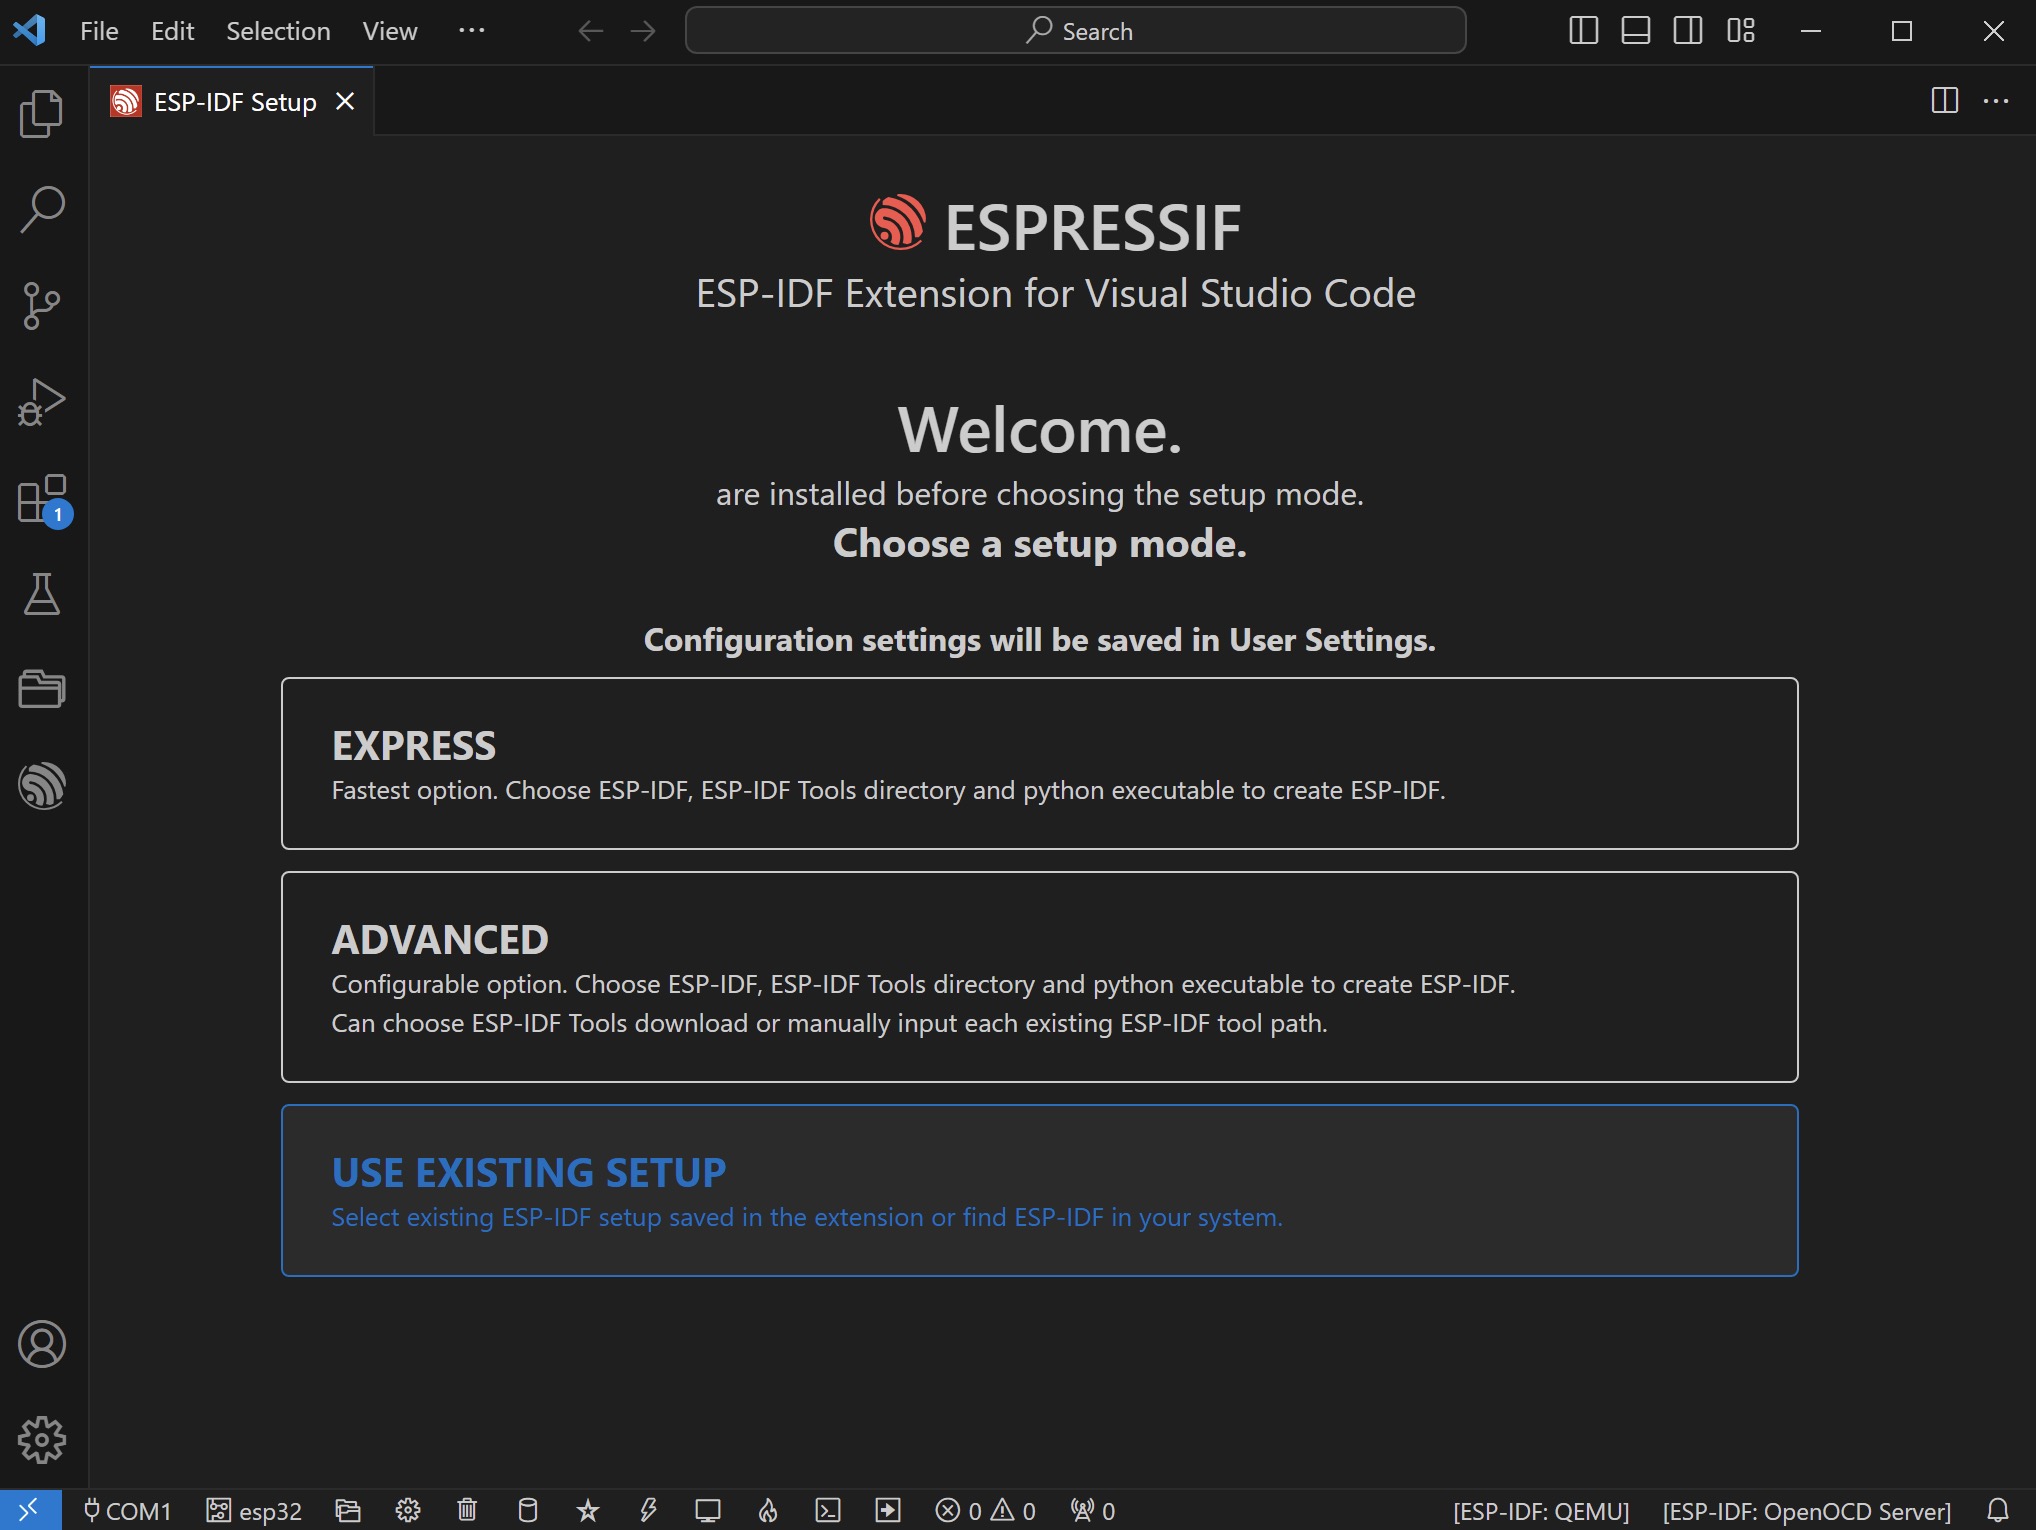 How To Check ESP IDF Version With VSCode